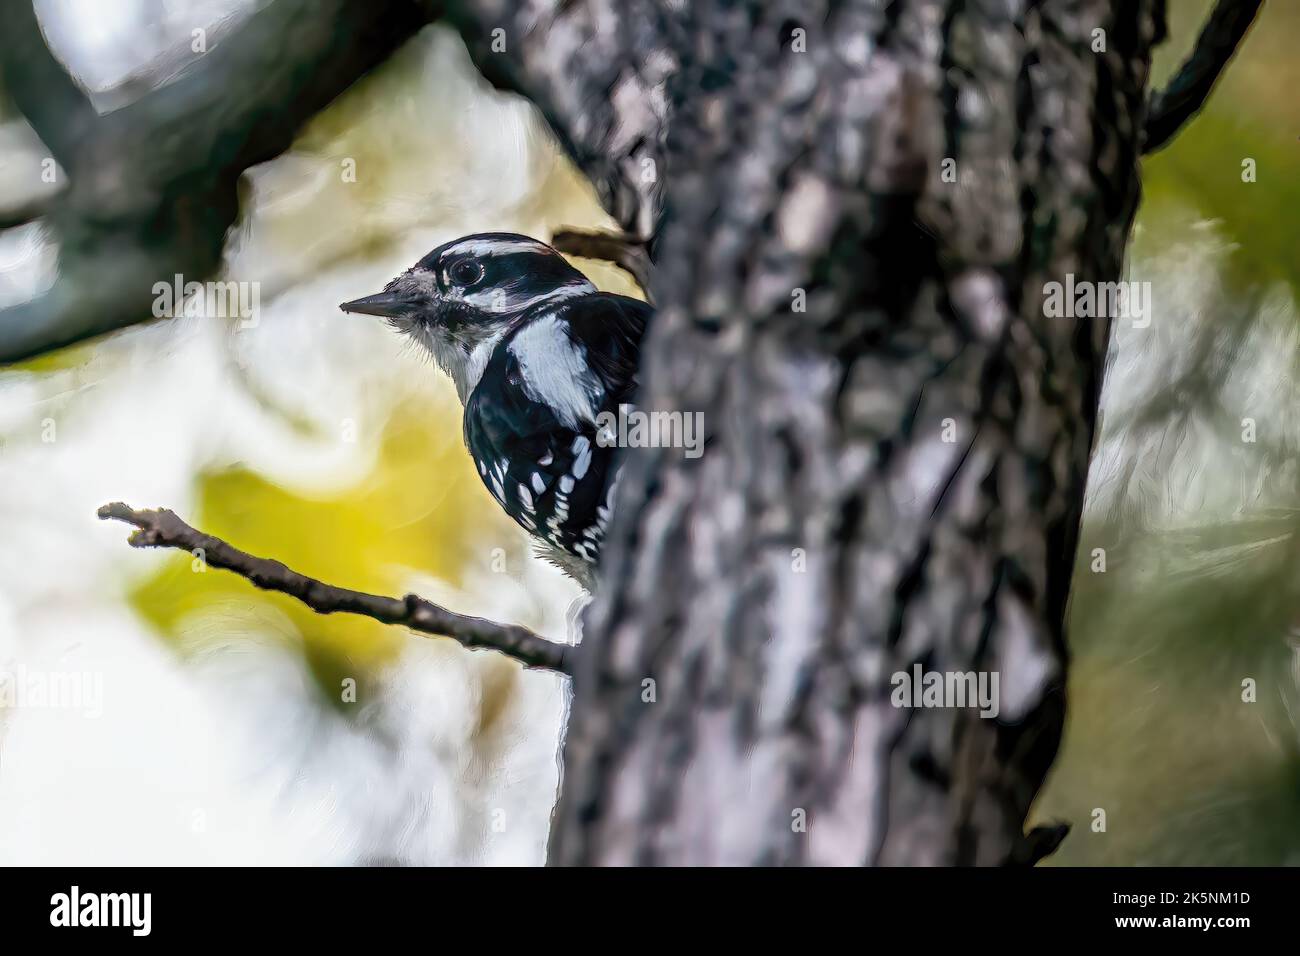 Male downy woodpecker peeking out from behind a tree with golden leaves on an autumn day in Taylors Falls, Minnesota USA. Stock Photo